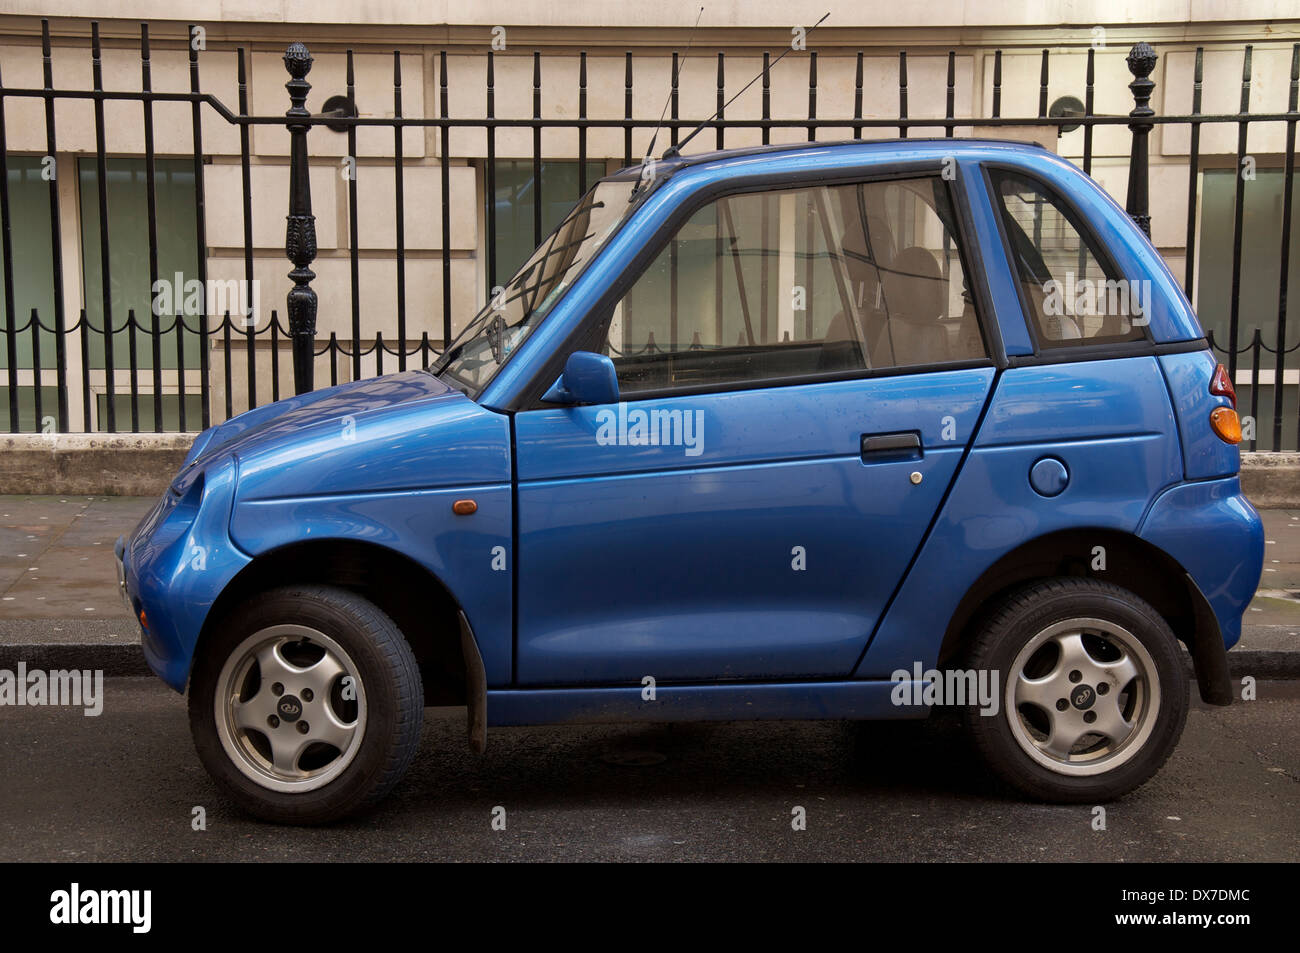 The REVAi, manufactured by the REVA Electric Car company of India, is a small automatic electric vehicle (EV). In the UK it is known as the G-Wiz. Stock Photo